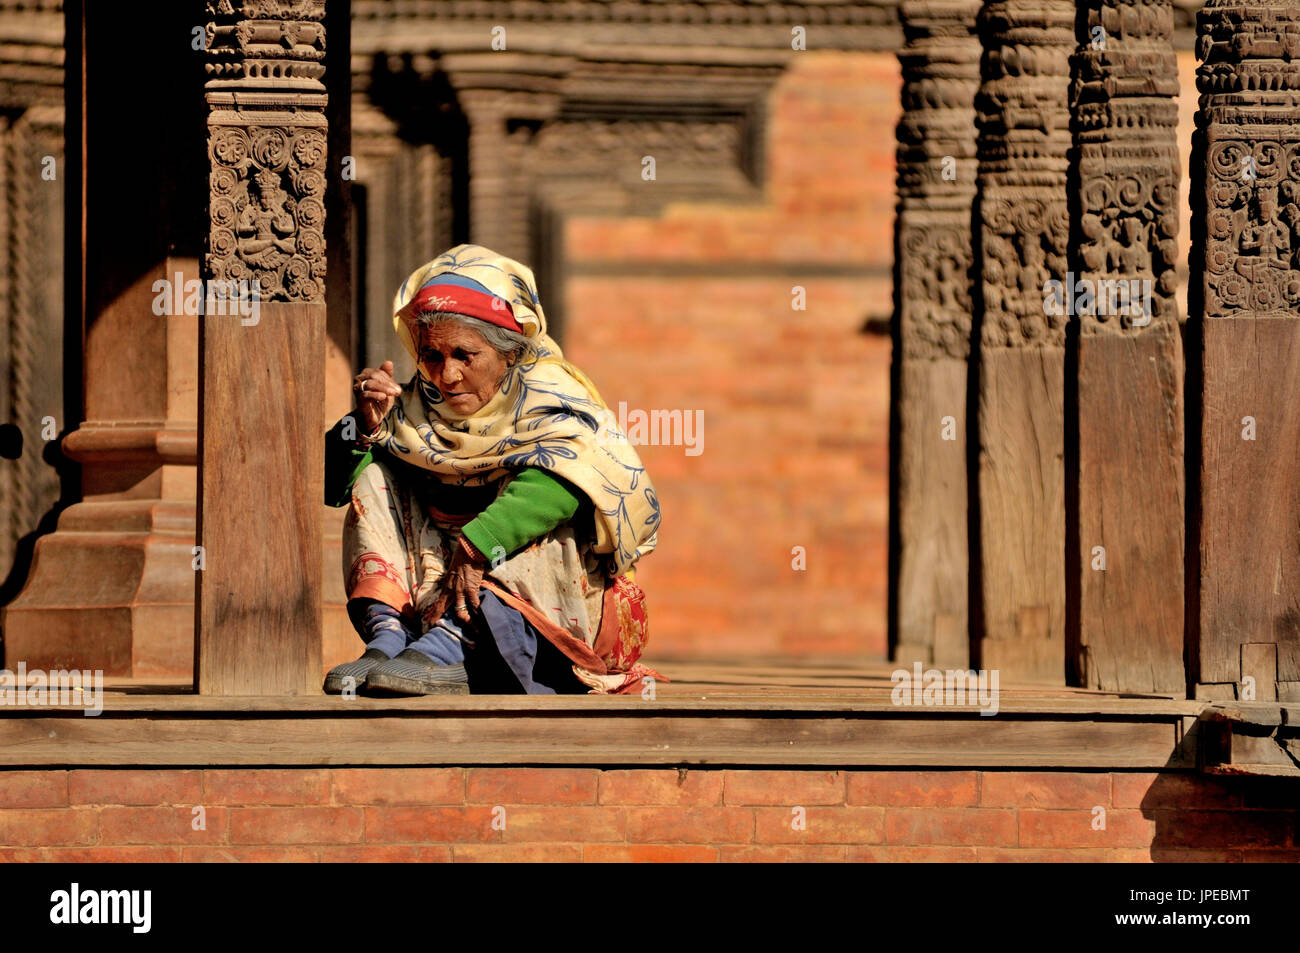 Nepal woman, resting in the square between the temples of Durbar Sq in Bhaktapur, Nepal Stock Photo